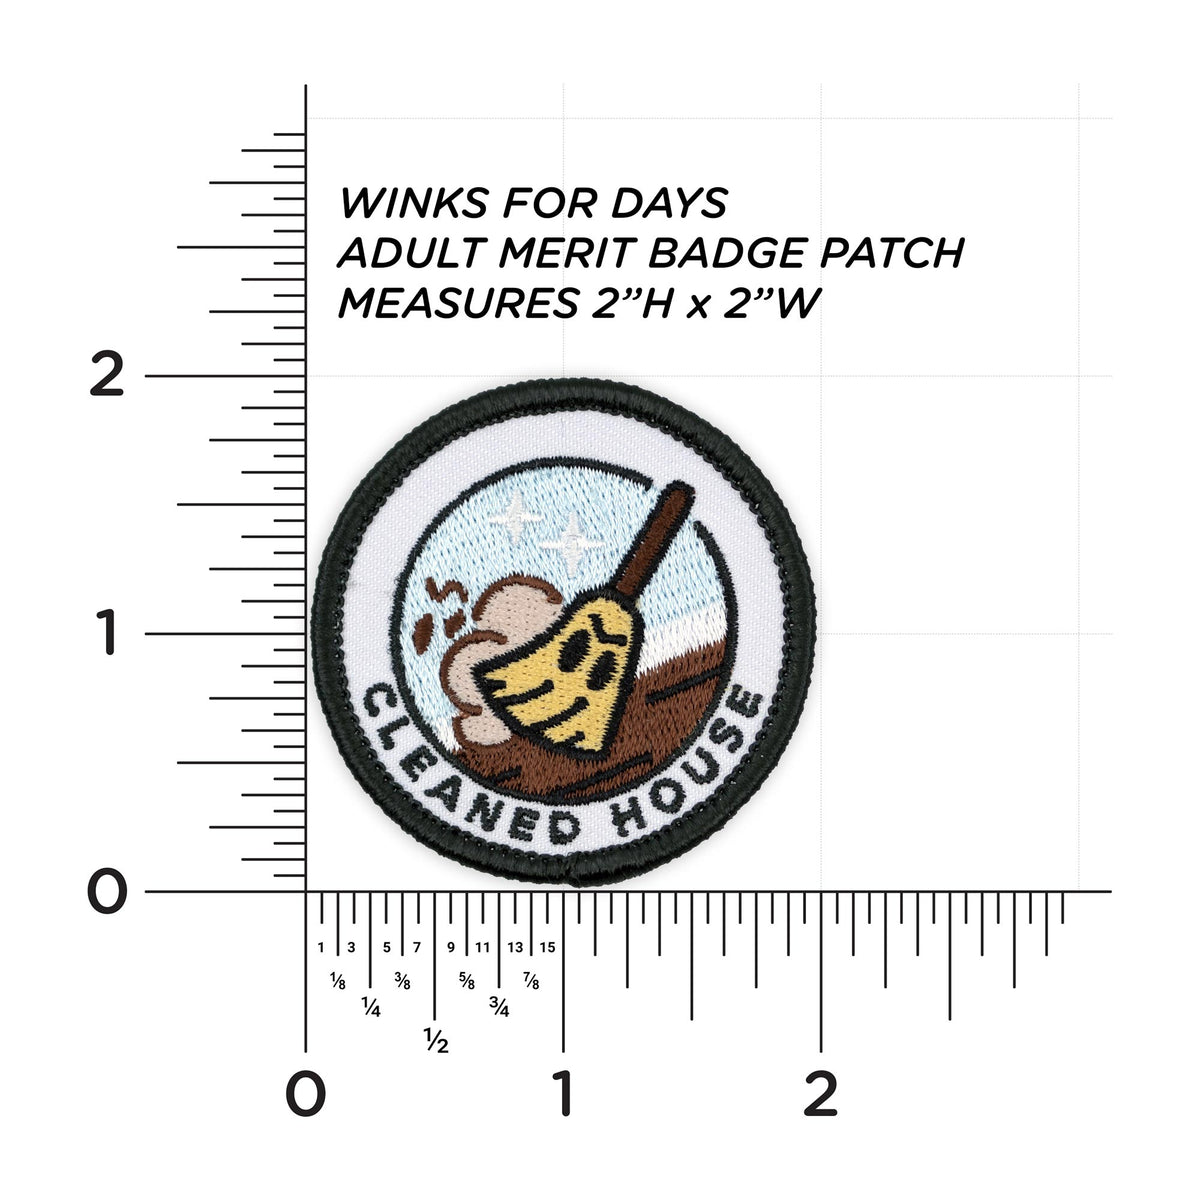 Cleaned House patch measurements